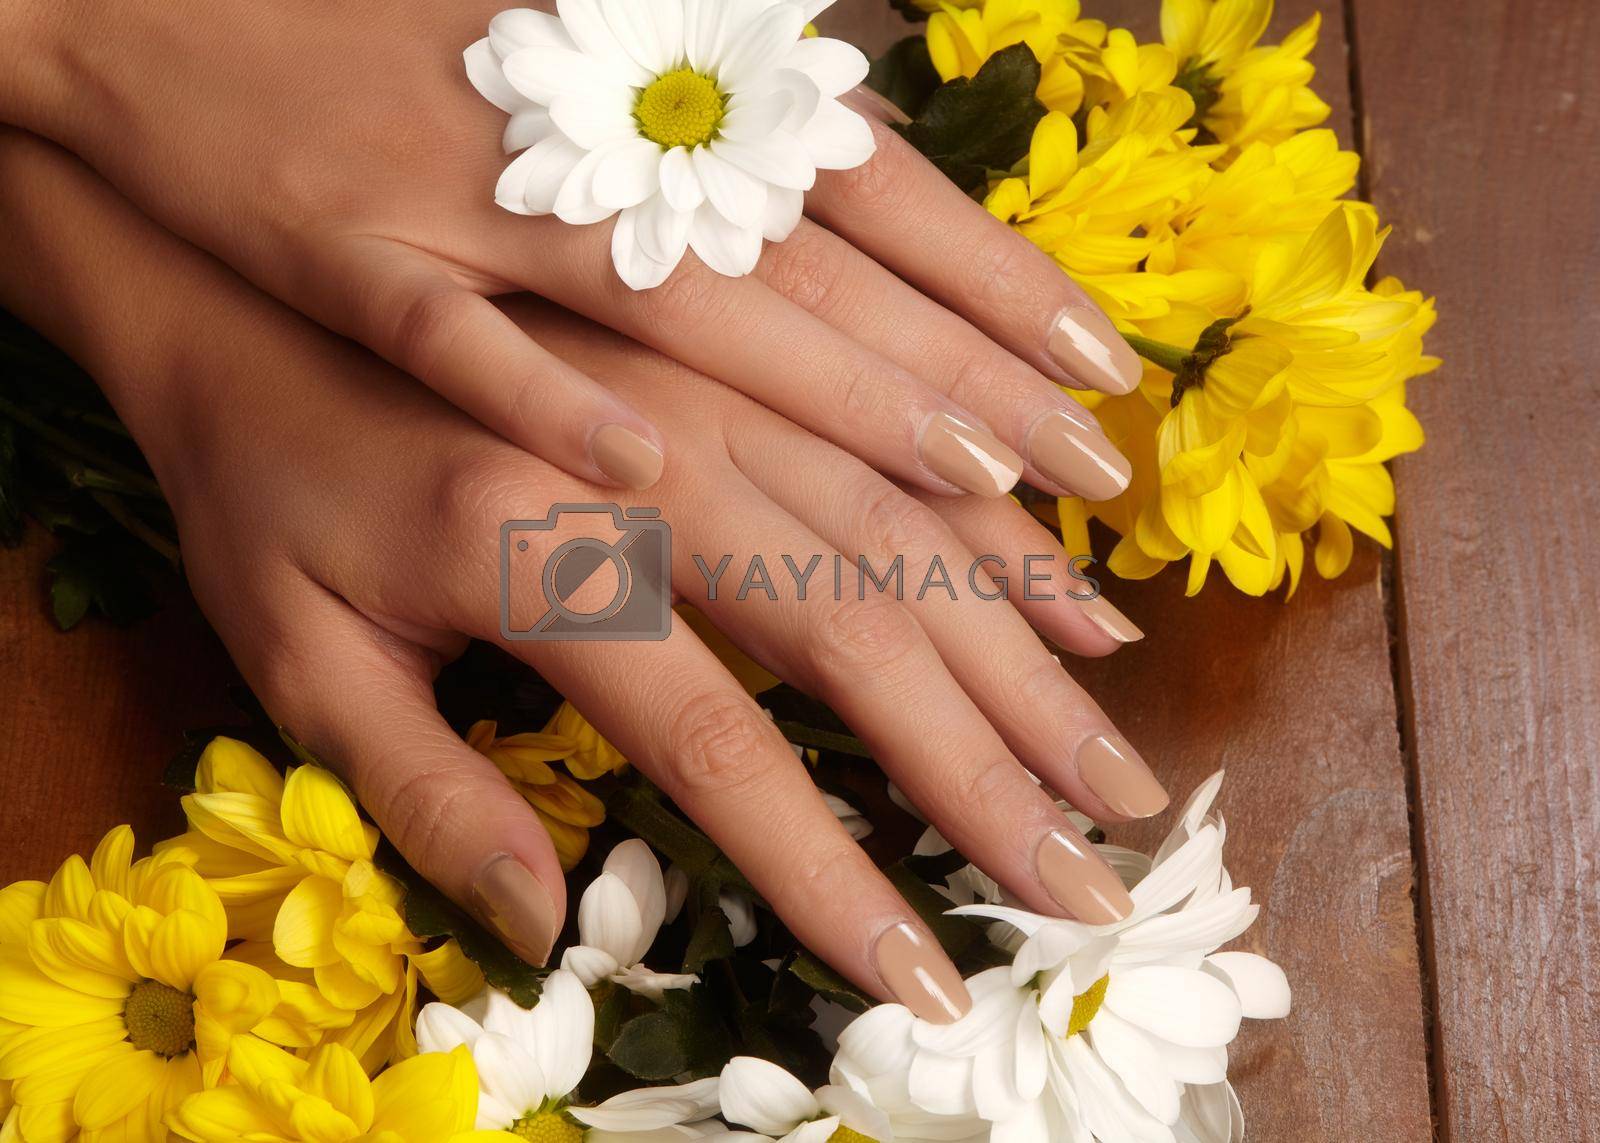 Royalty free image of Manicured nails with natural nail polish. Manicure with beige nailpolish. Fashion manicure. Shiny gel lacquer. Spring by MarinaFrost